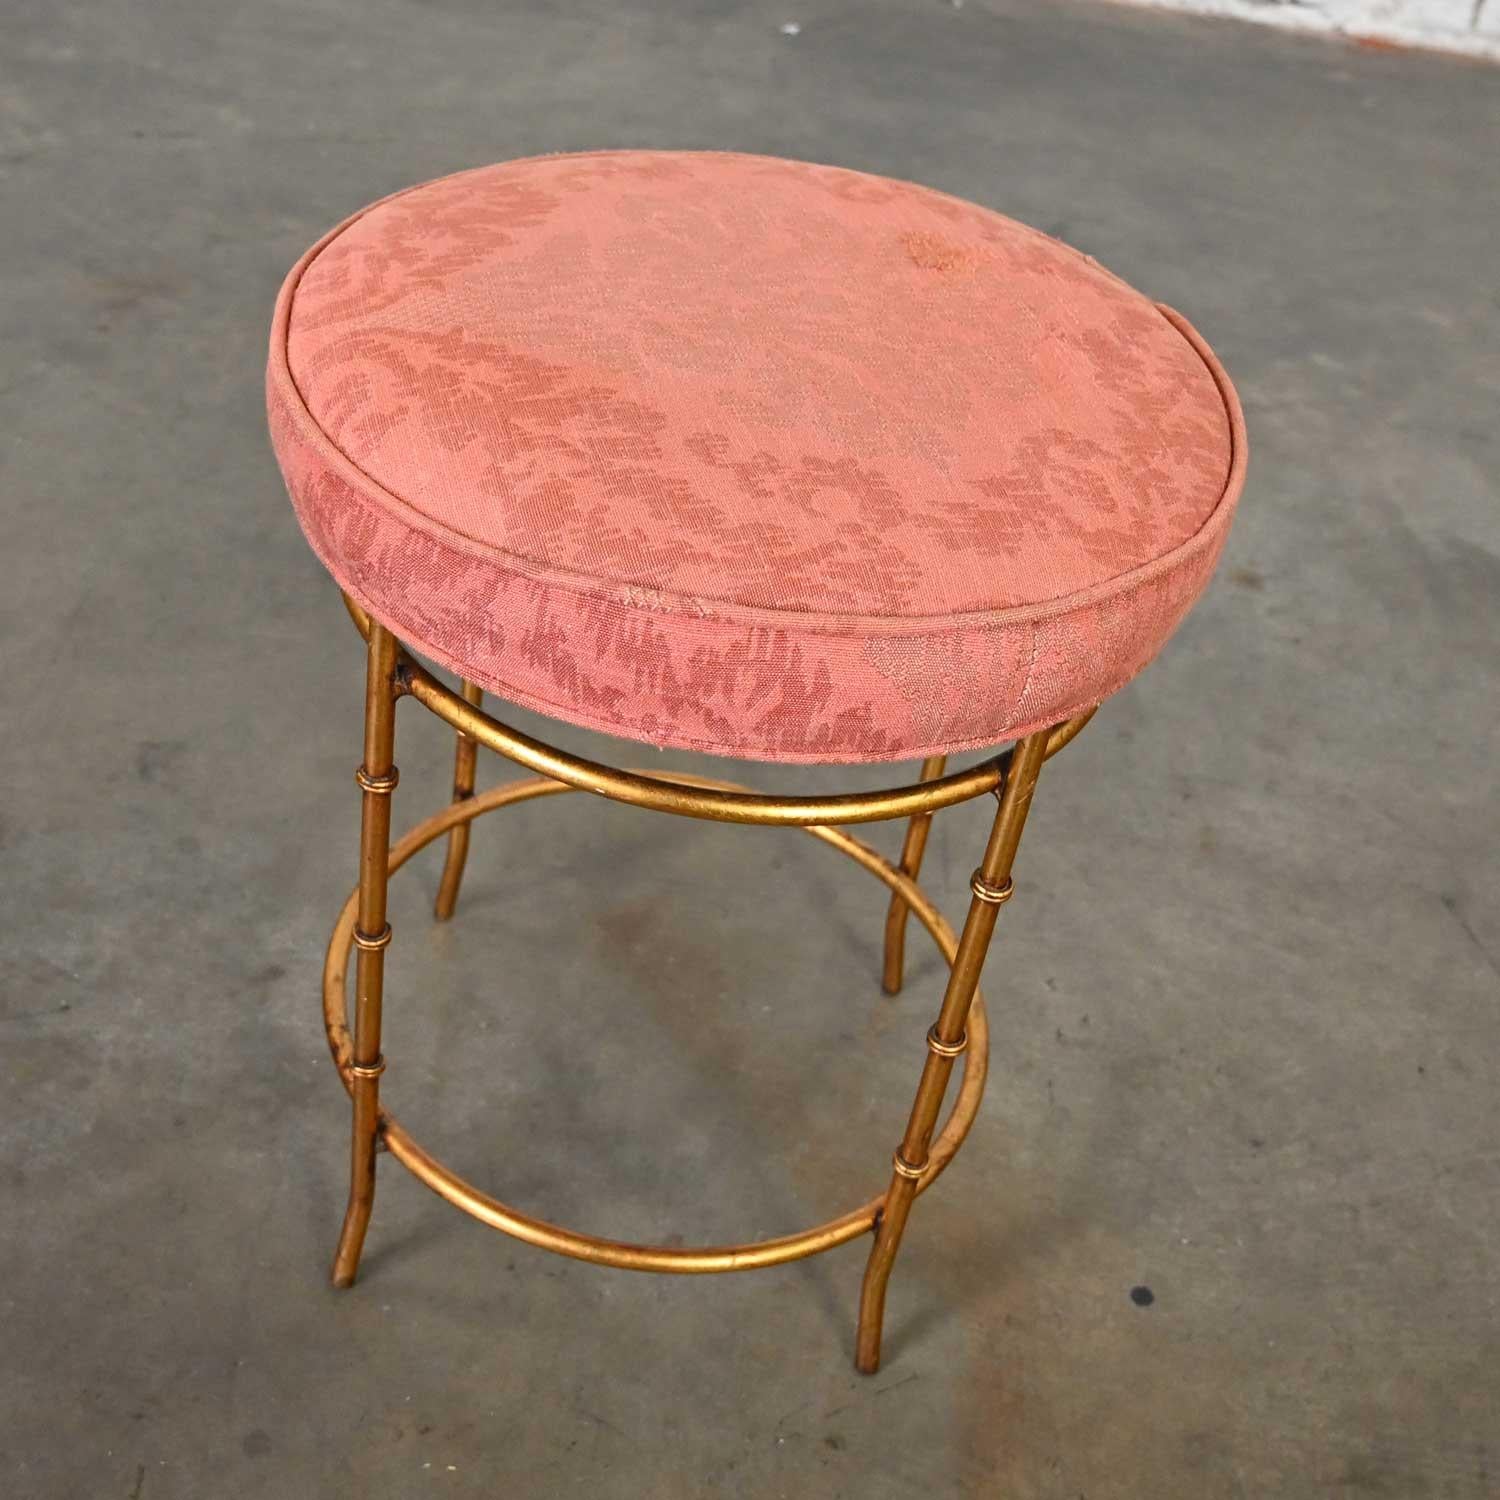 Neoclassical Revival Mid 20th Italian Style Round Stool Rose Damask Seat Gilt Metal Faux Bamboo Legs  For Sale